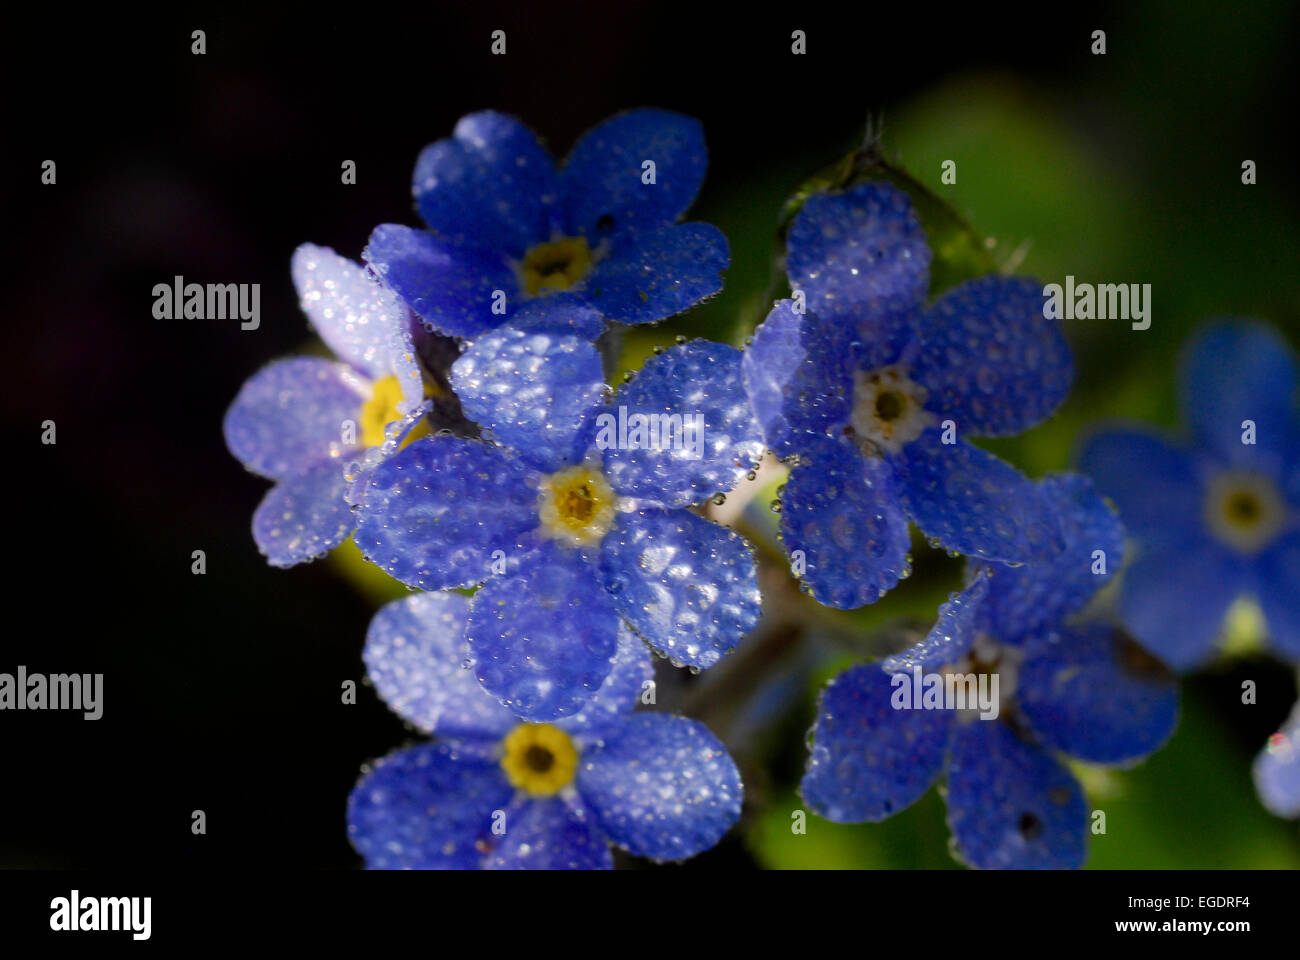 Pearls of dew covering a forget-me-not, Germany Stock Photo